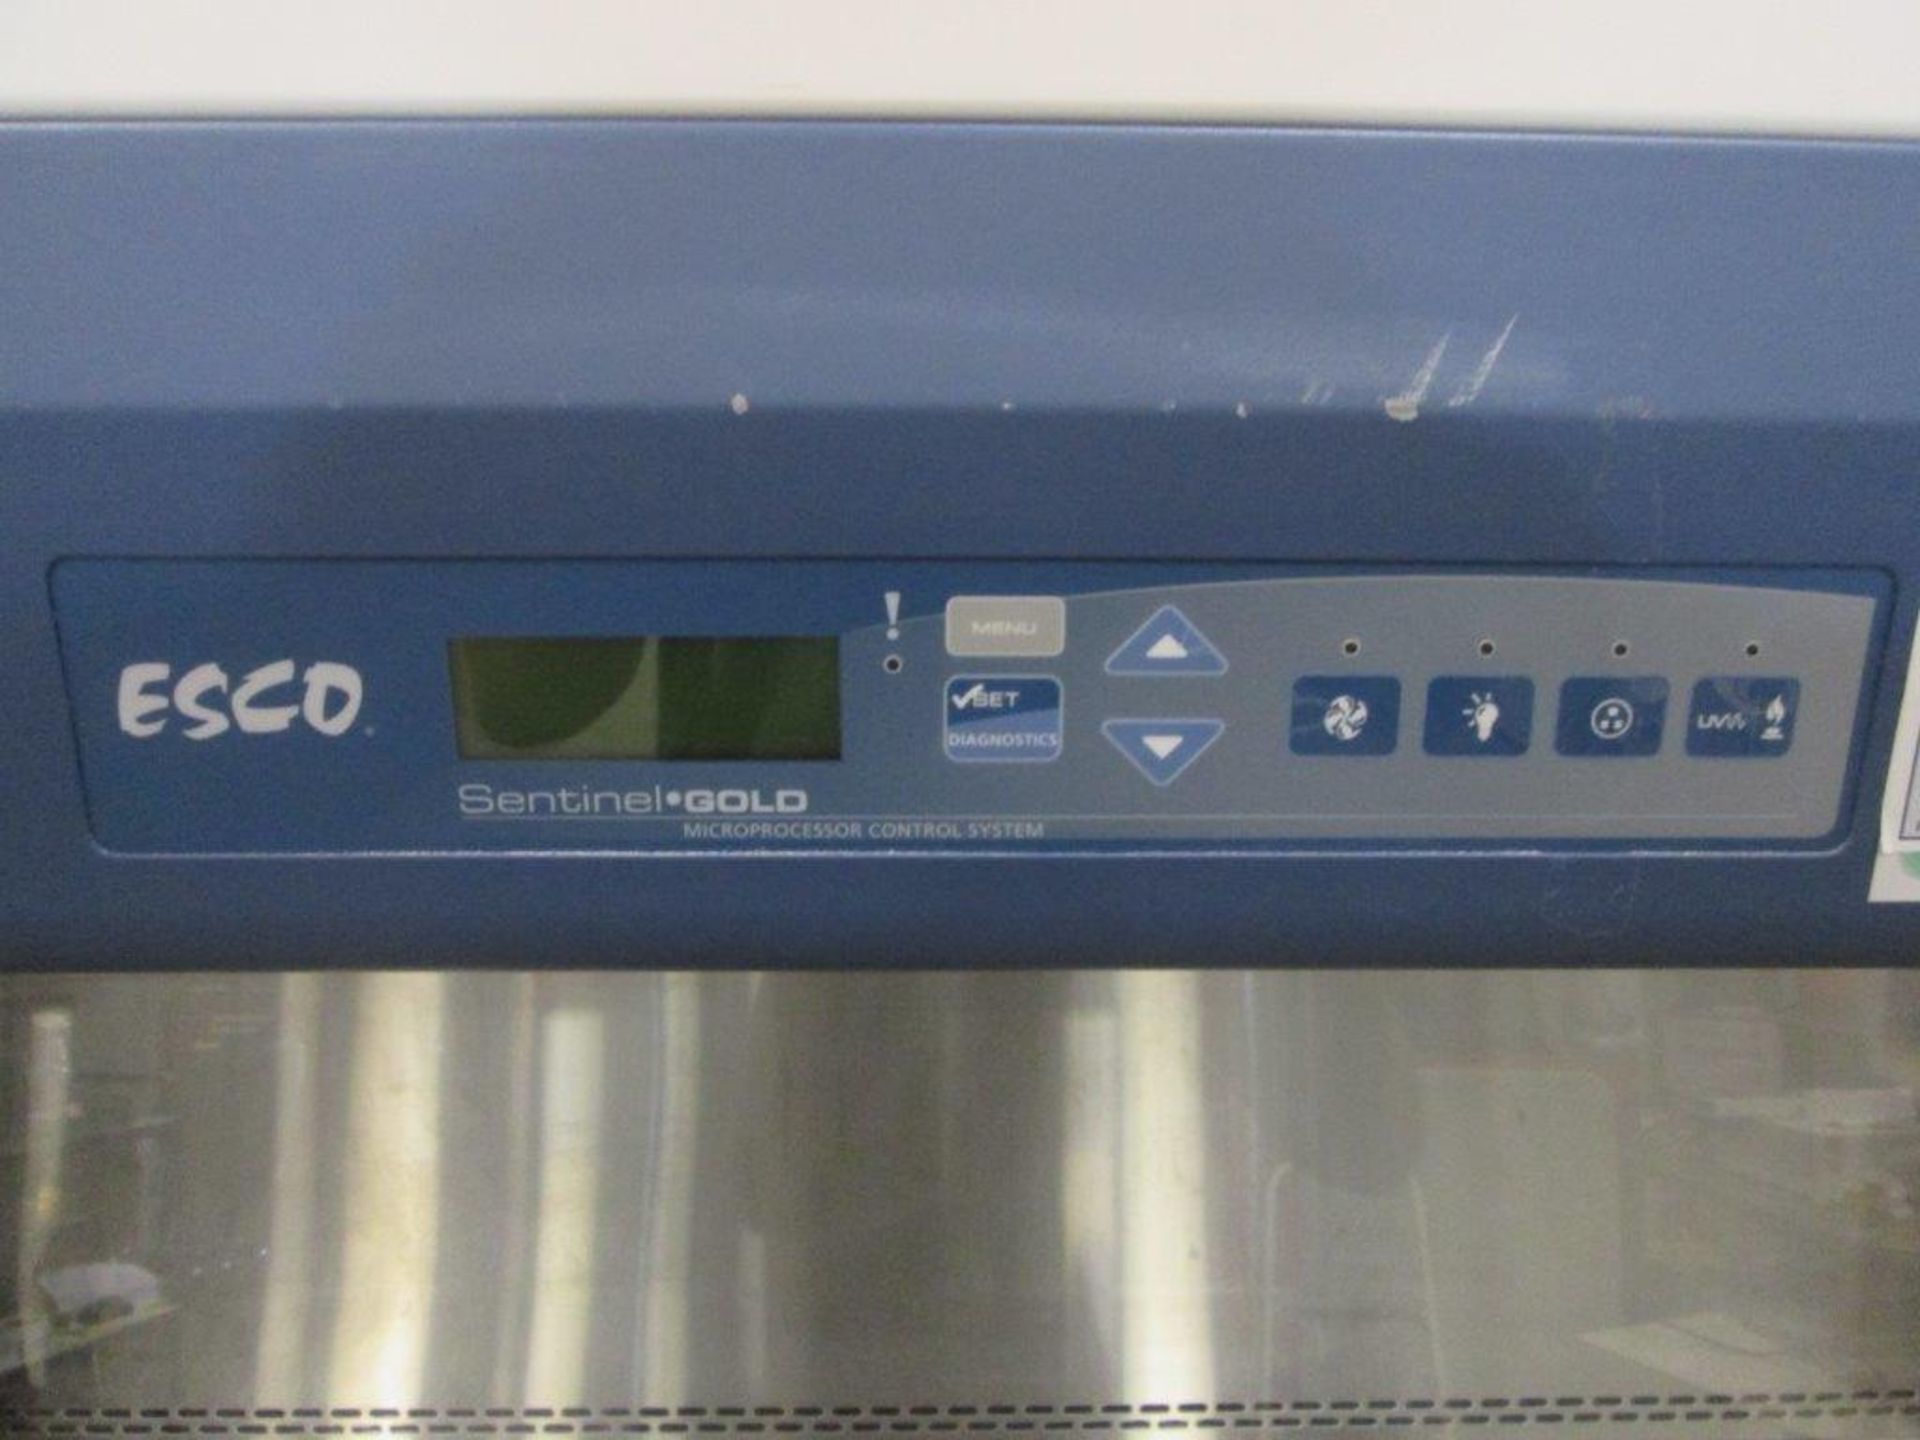 Esco 6 Ft. Lab Culture Class II Type A2 Biological Safety Cabinet - Image 2 of 3